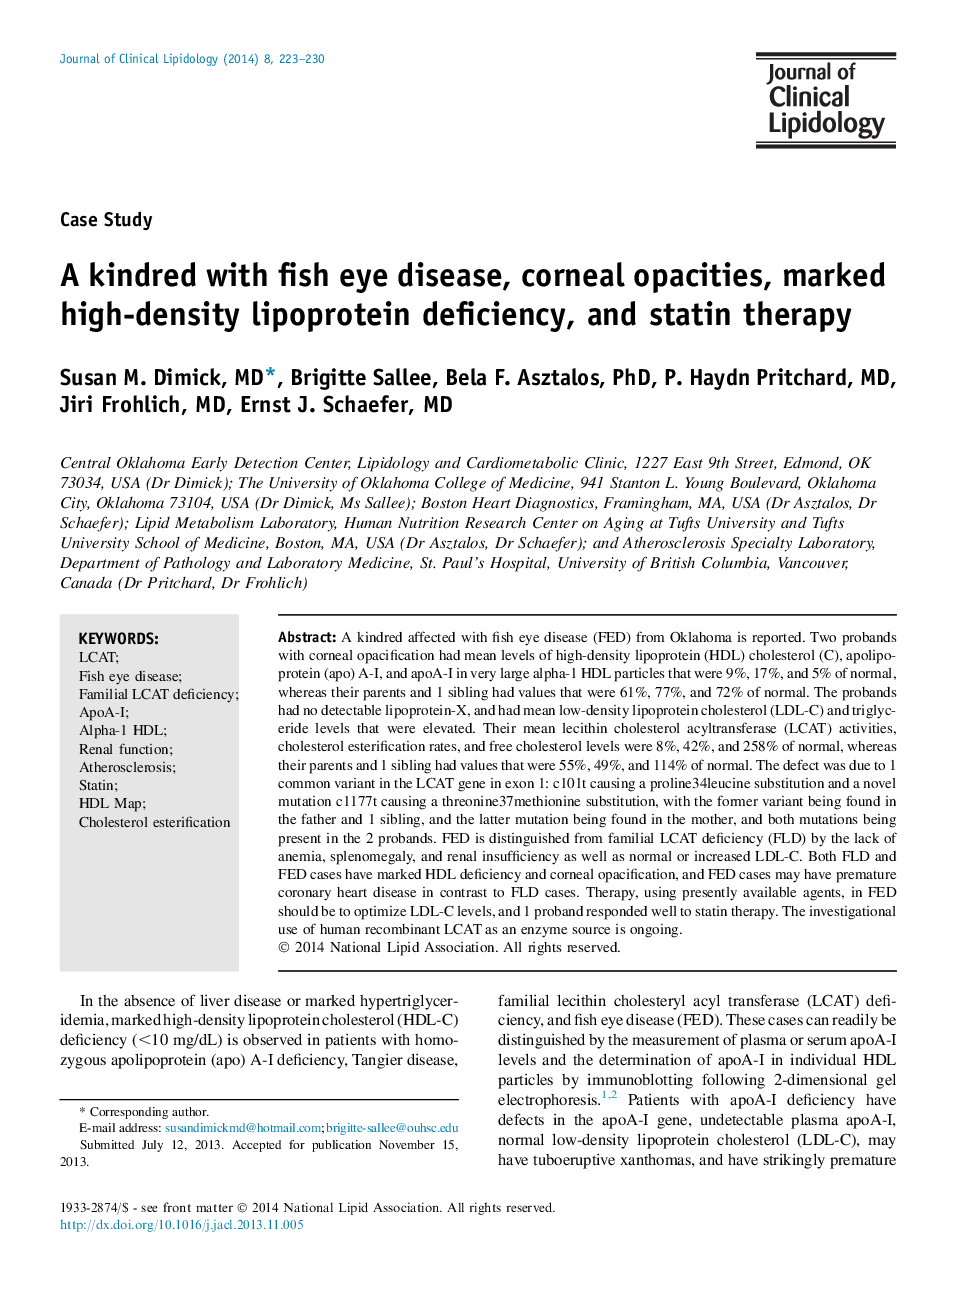 A kindred with fish eye disease, corneal opacities, marked high-density lipoprotein deficiency, and statin therapy